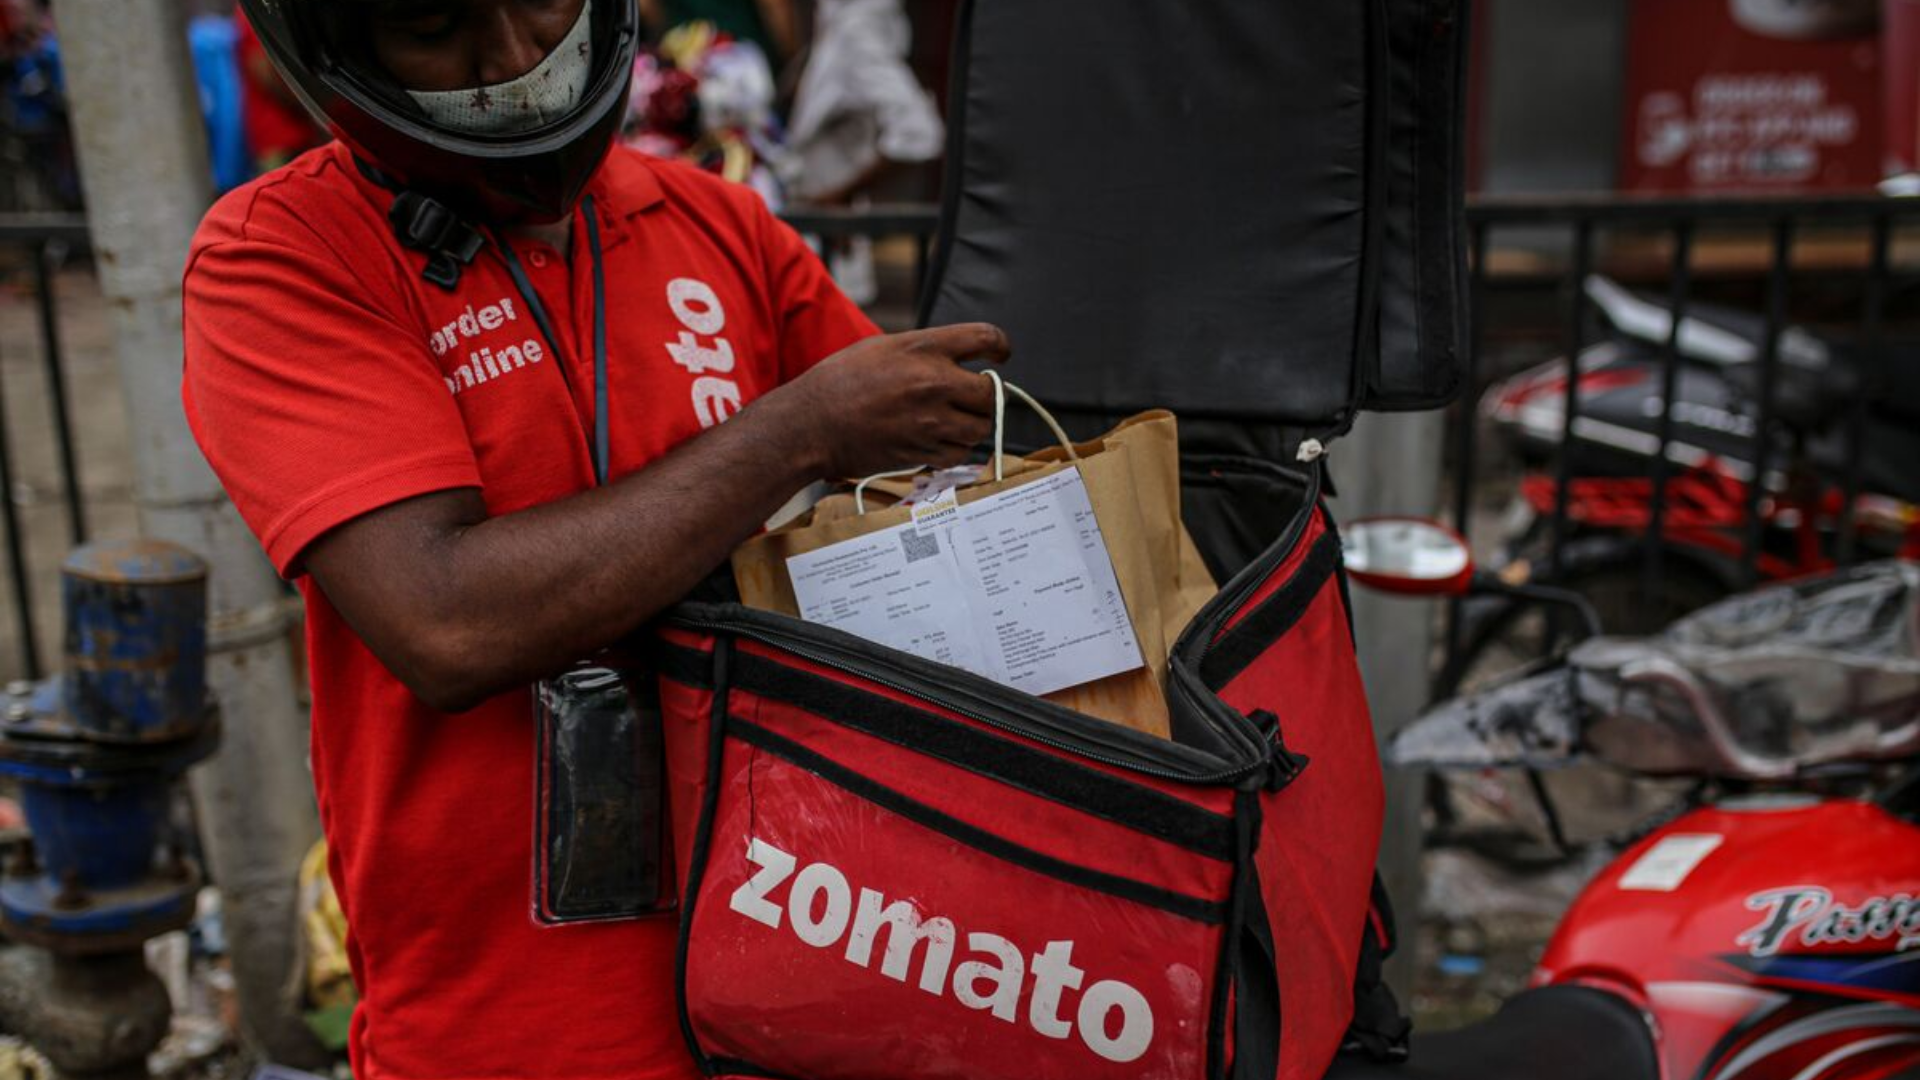 Why Does Zomato Advise Its Customers To Refrain From Ordering In The Afternoon?